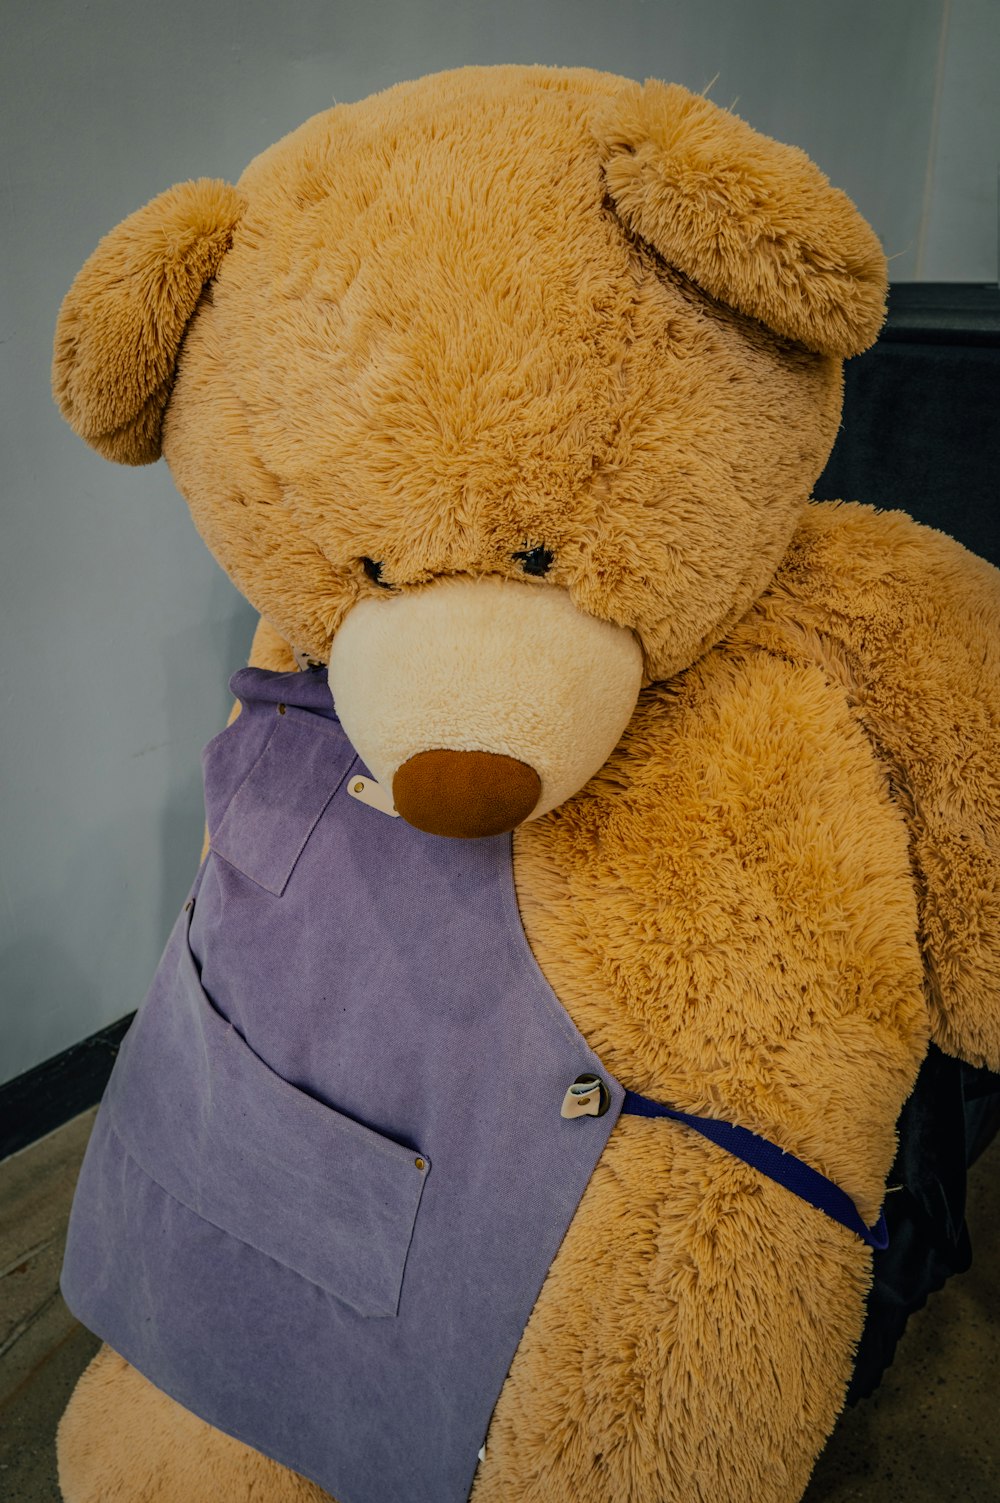 a large brown teddy bear sitting on top of a wooden floor